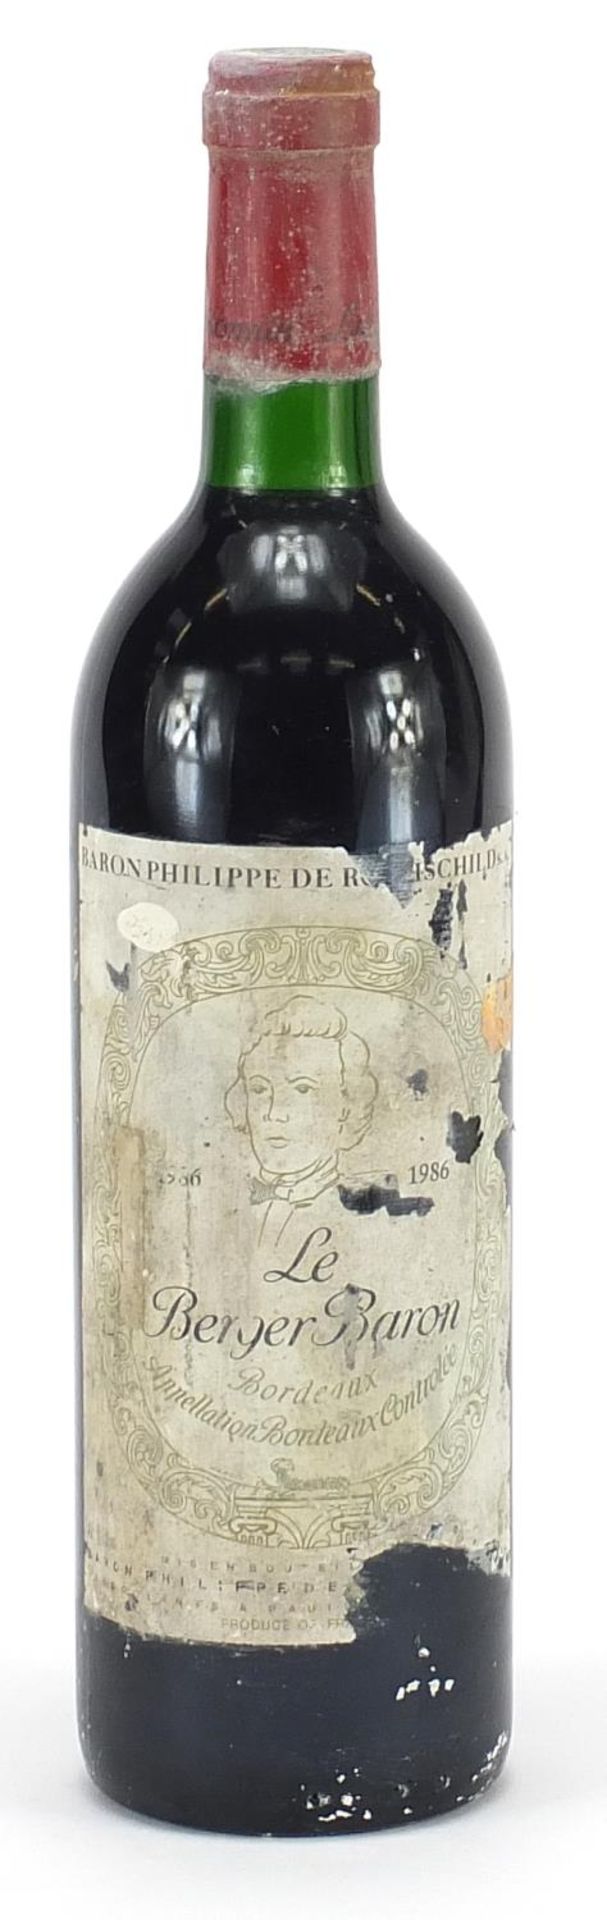 Bottle of 1986 Le Berger Baron Philippe de Rothschild Bordeaux red wine : For Further Condition